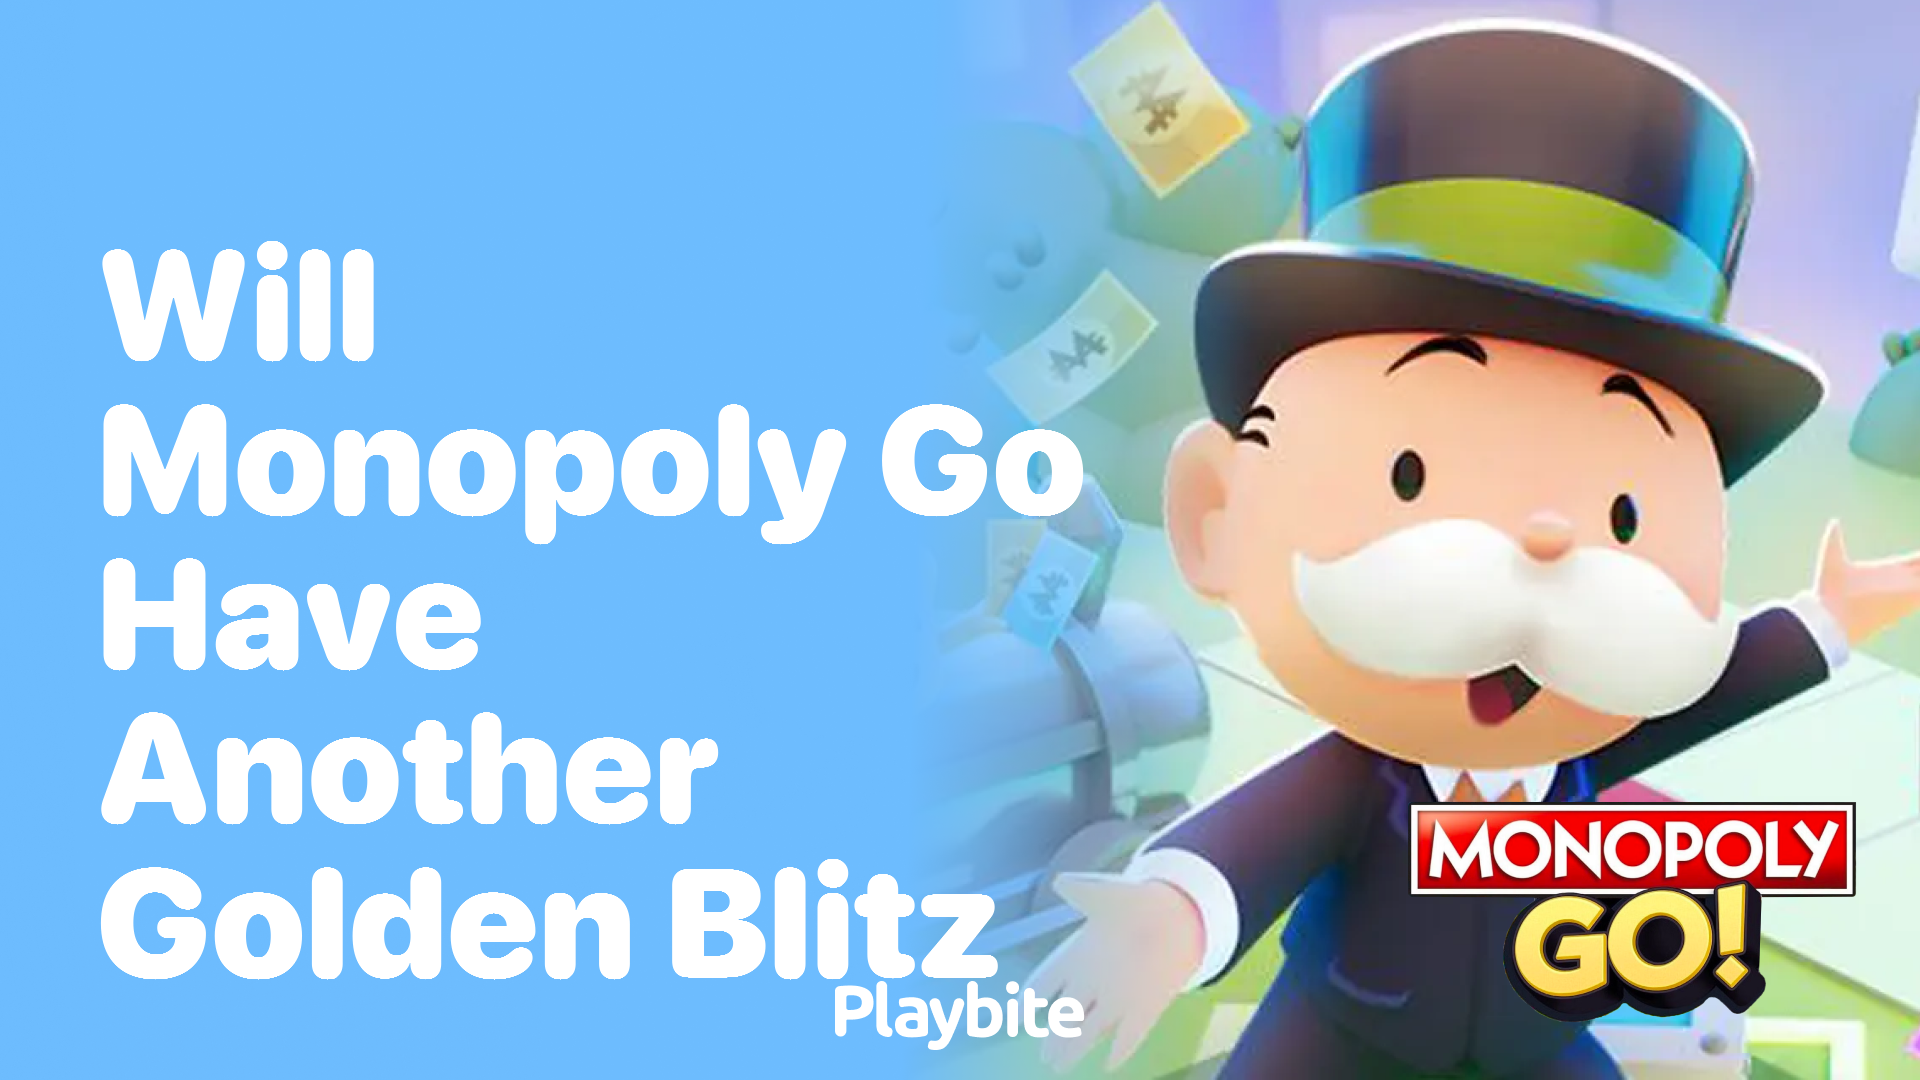 Will Monopoly Go Have Another Golden Blitz?